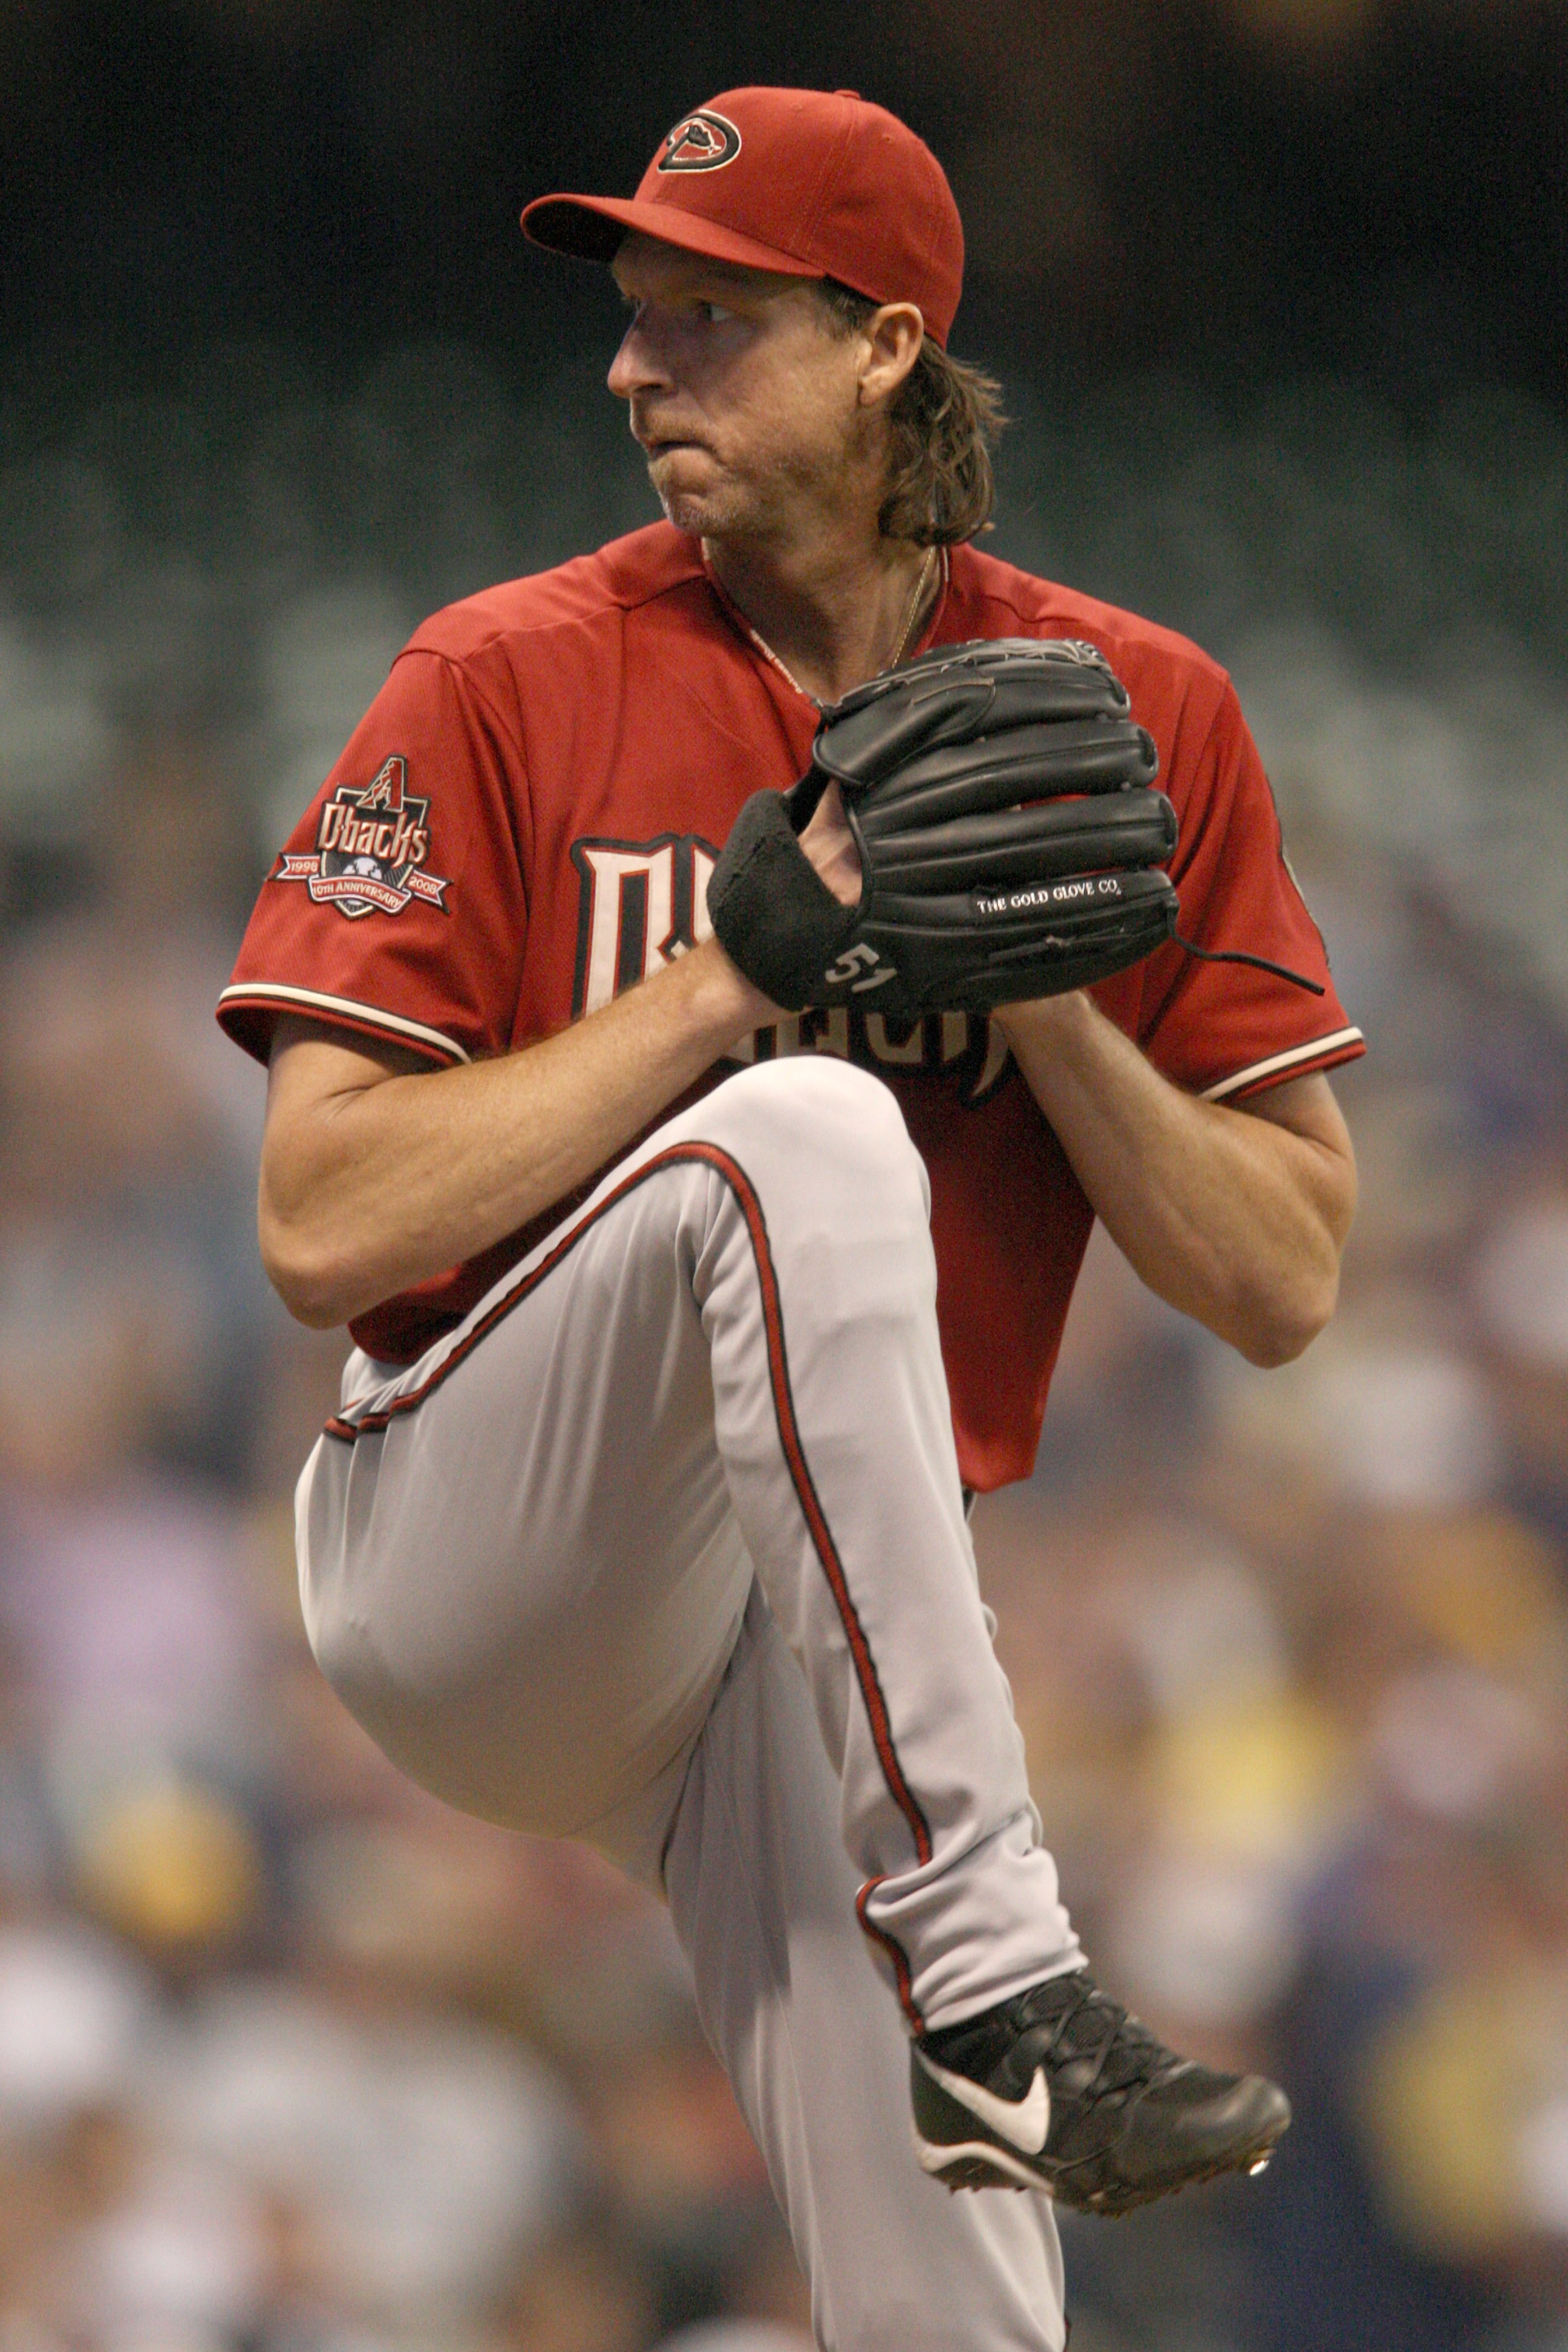 MILWAUKEE - JUNE 03: Pitcher Randy Johnson #51 of the Arizona Diamondbacks delivers a pitch against the Milwaukee Brewers on June 3, 2008 at Miller Park in Milwaukee, Wisconsin. The Brewers defeated the Diamondbacks 7-1. (Photo by Jonathan Daniel/Getty Im